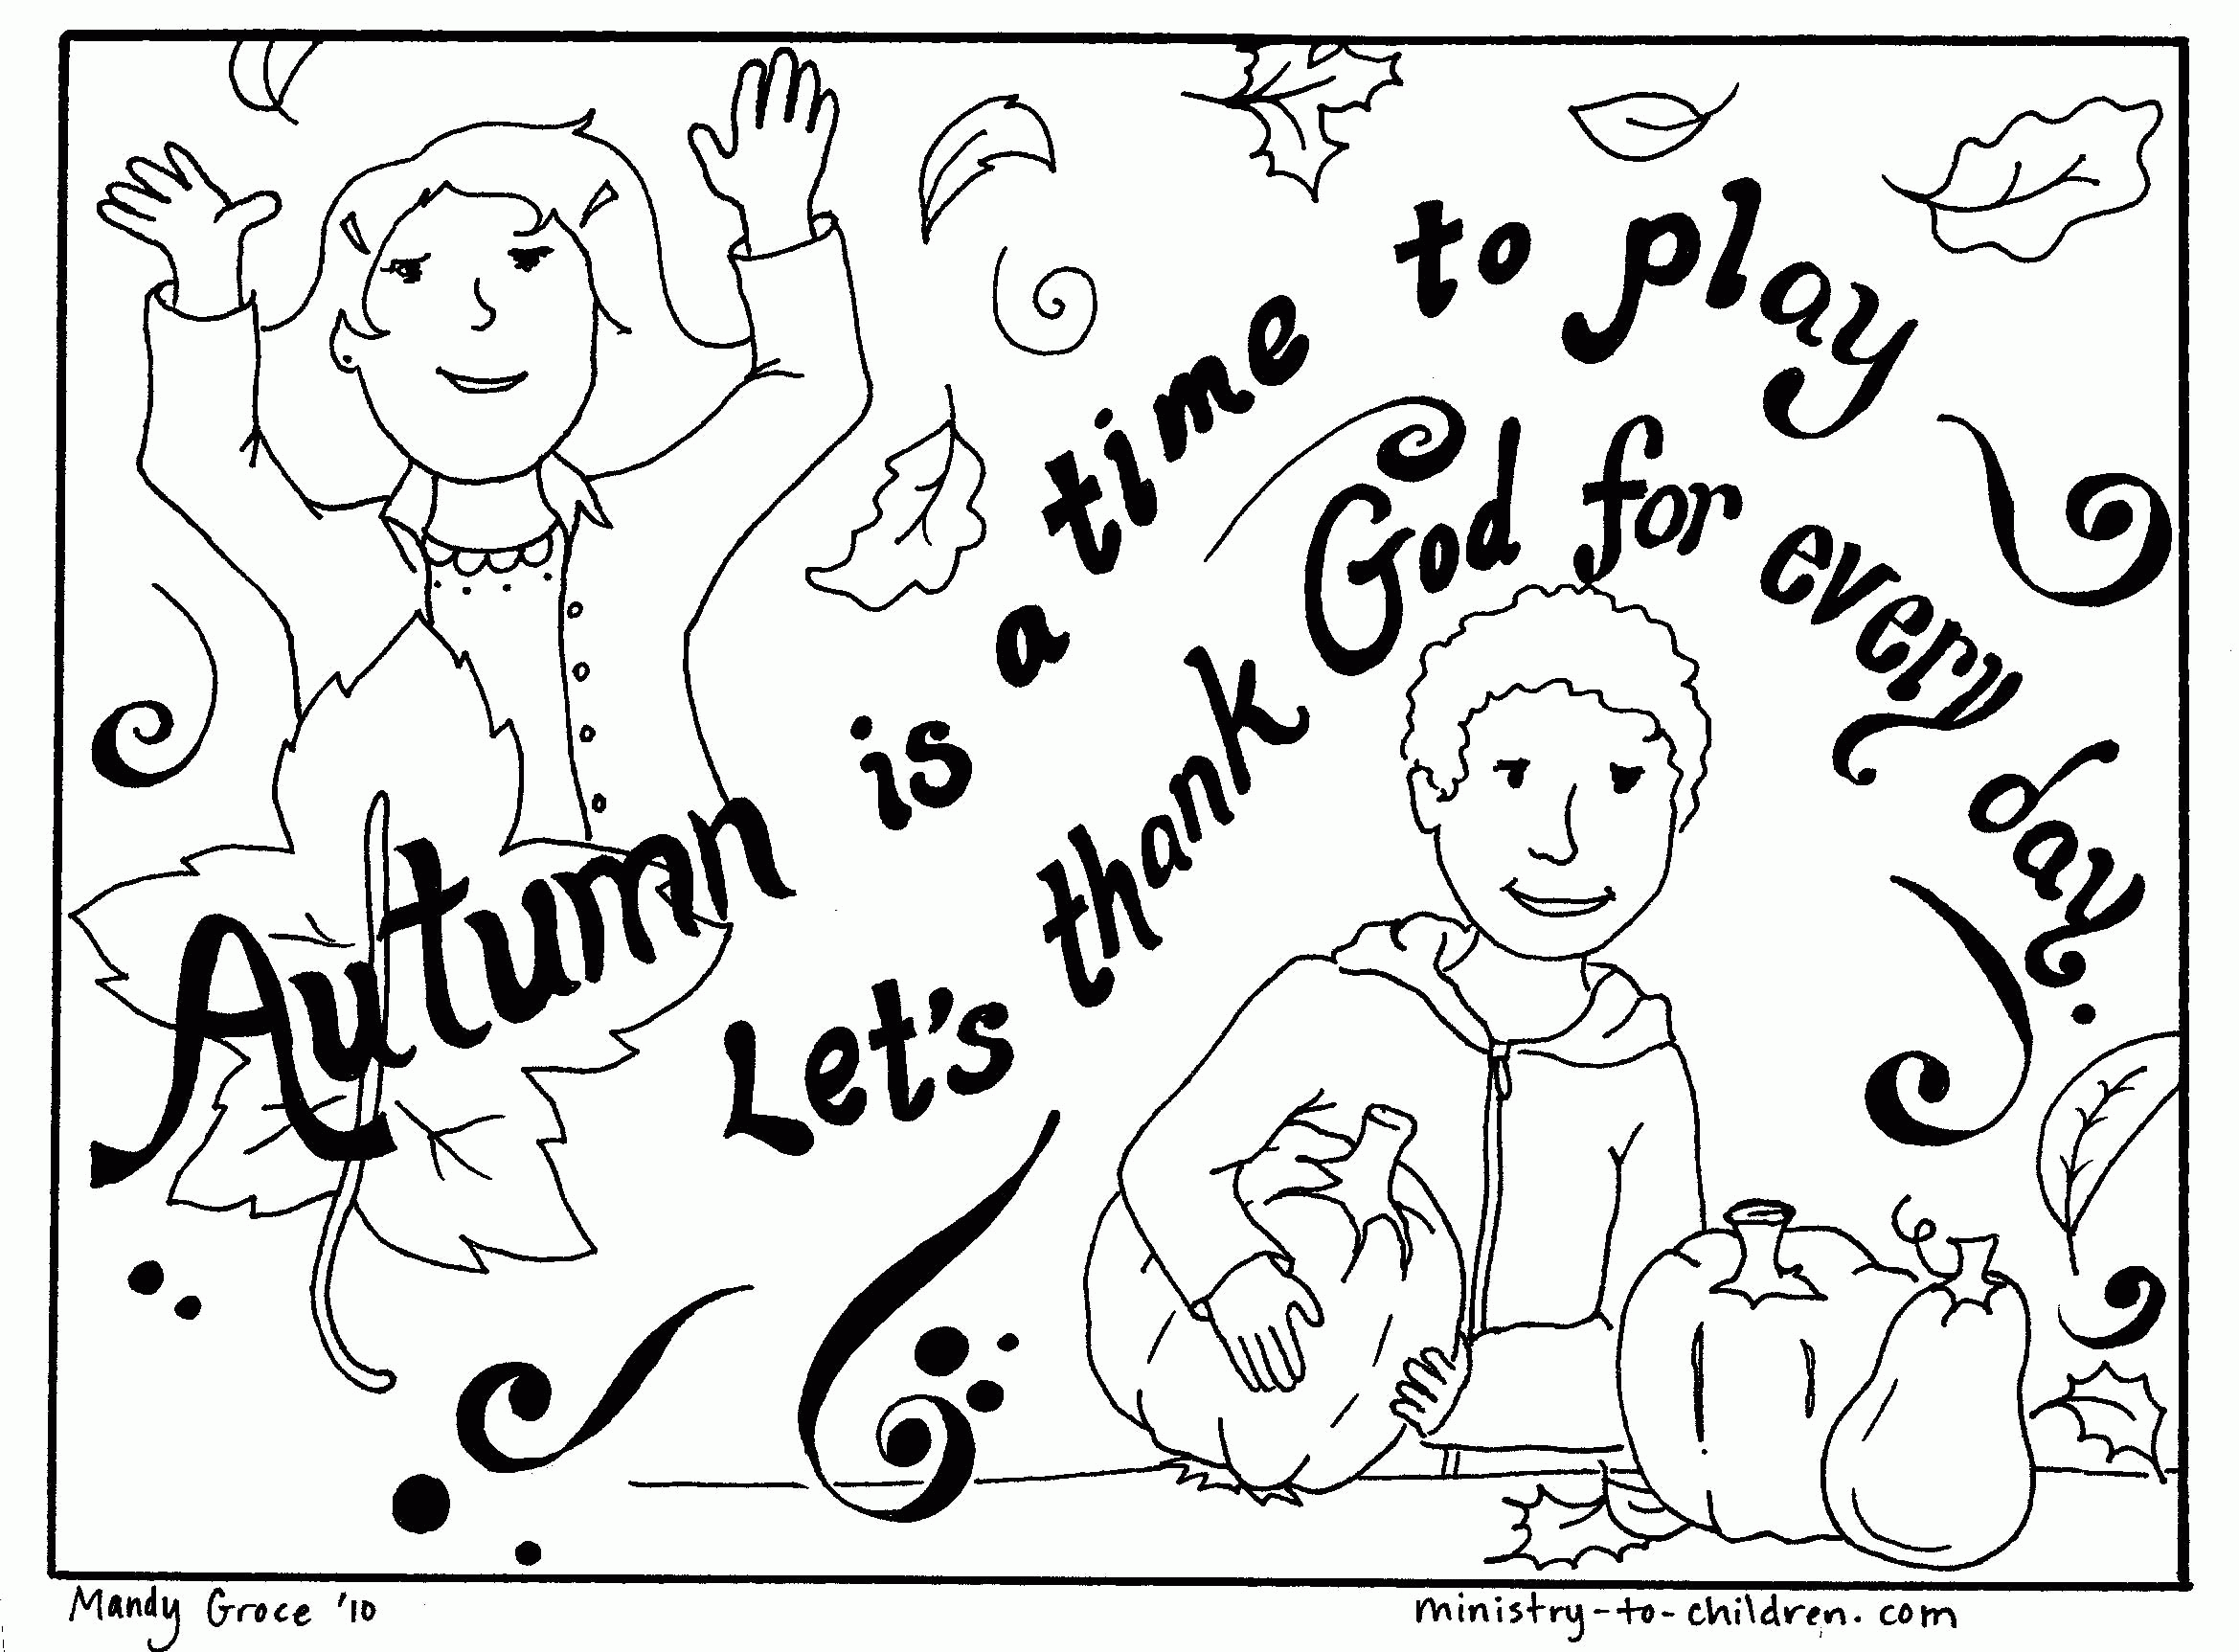 Autumn Coloring Page “Let's Thank God”